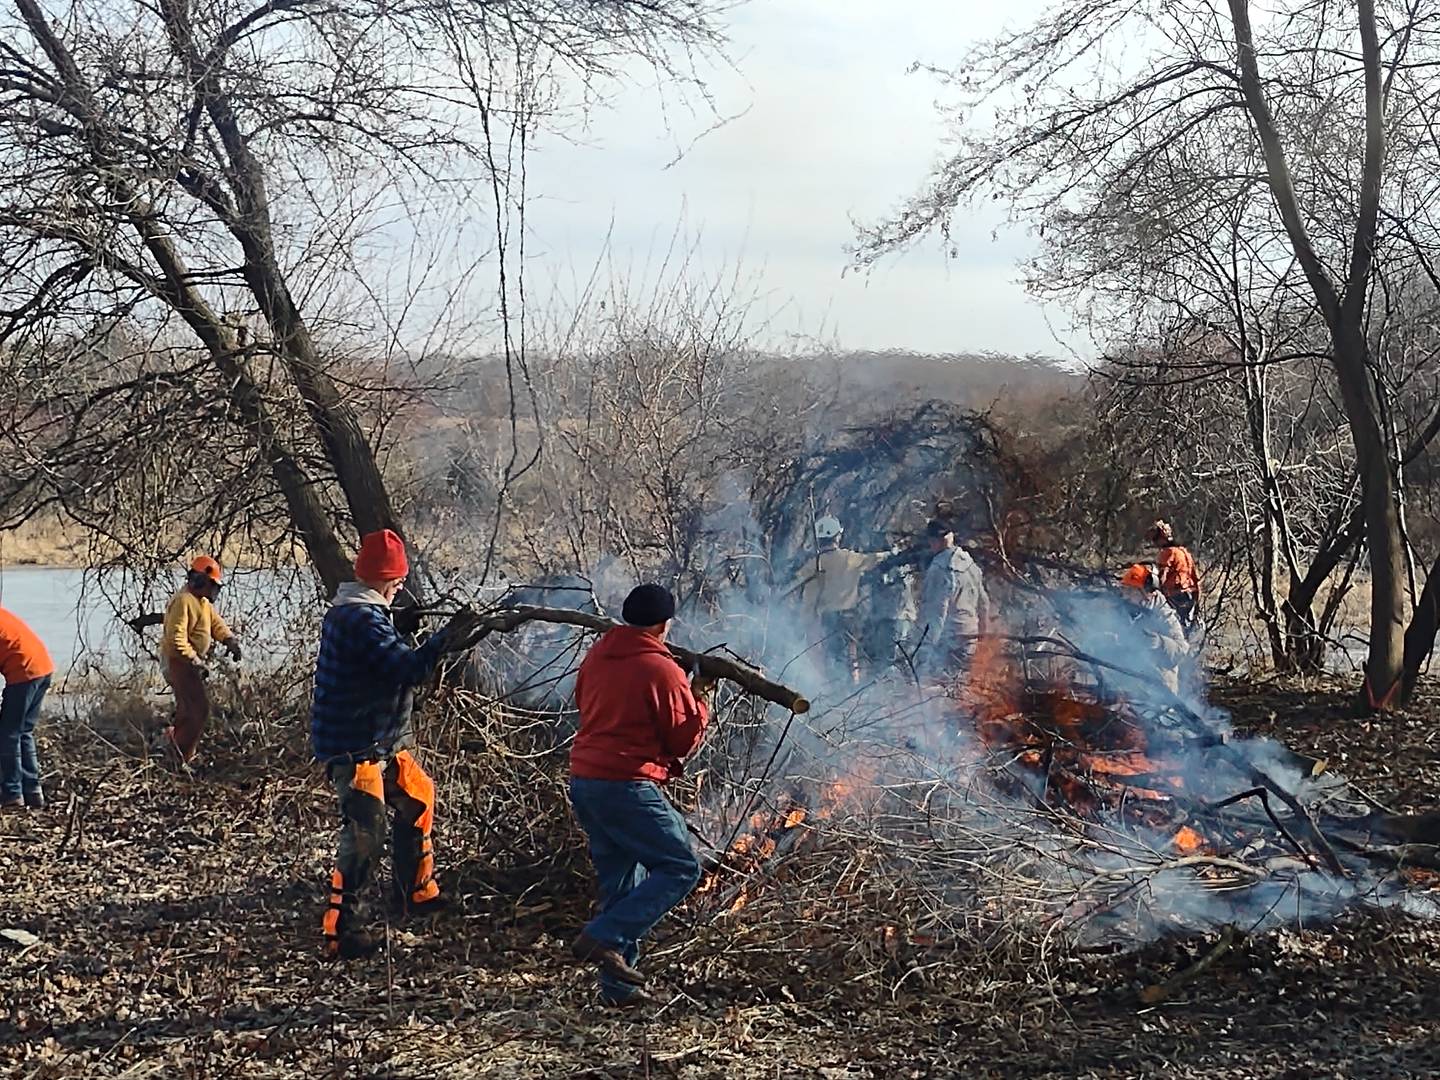 Staff and volunteers with the Land Conservancy of McHenry County "rescue" two oaks in Harvard Saturday morning, Dec. 31, 2022, as part of their annual New Year's Eve Oak Rescue in an attempt to preserve the native tree species around the county.